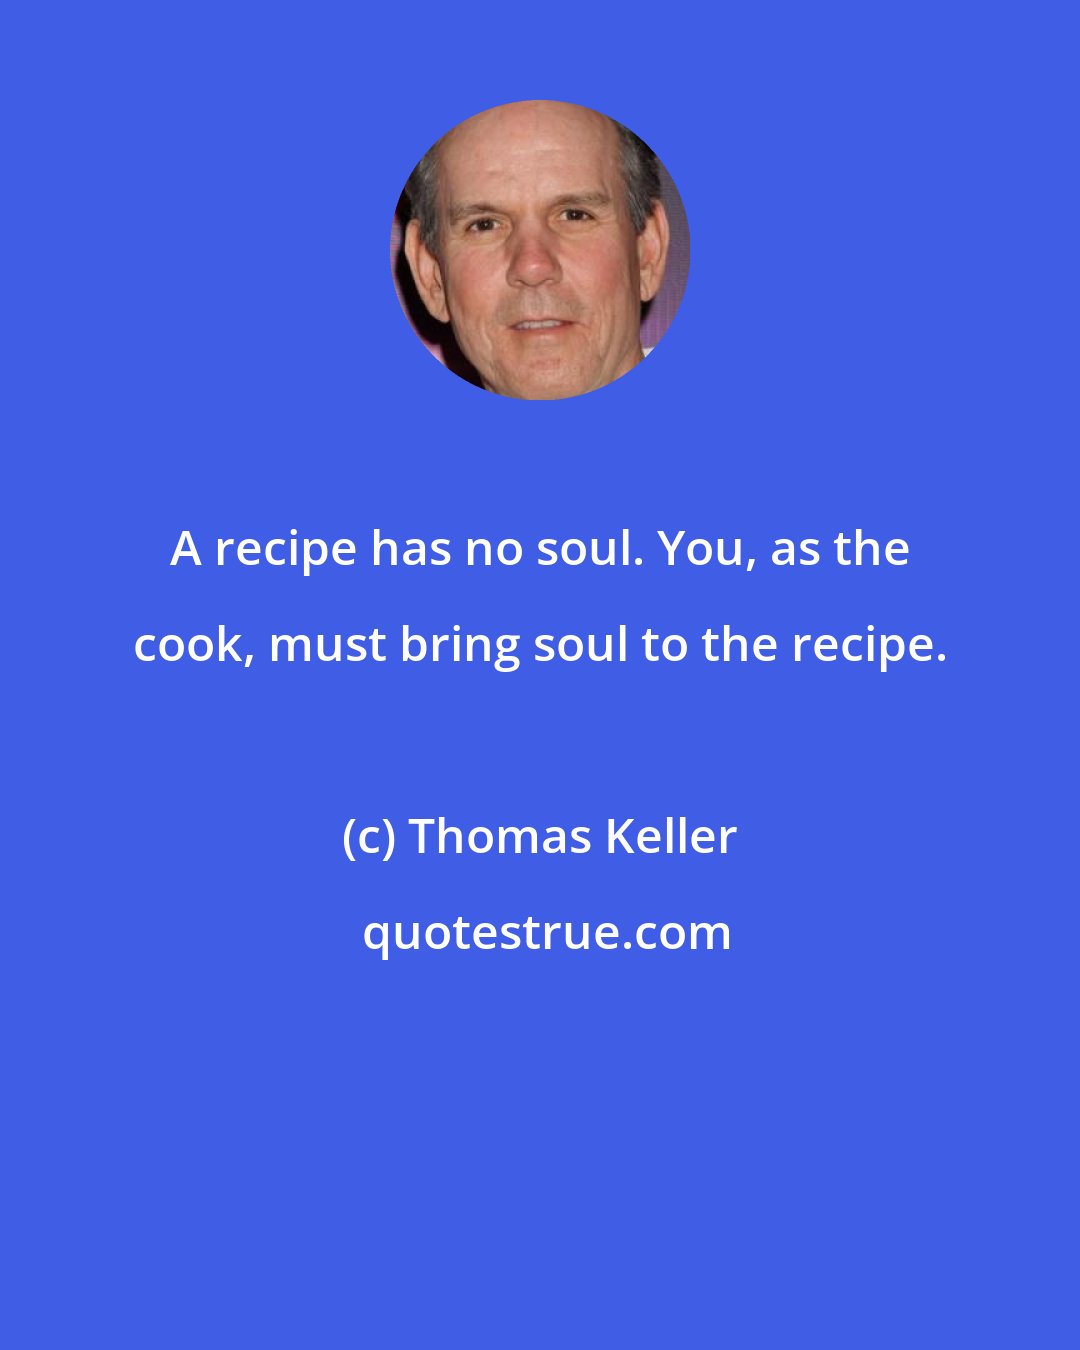 Thomas Keller: A recipe has no soul. You, as the cook, must bring soul to the recipe.